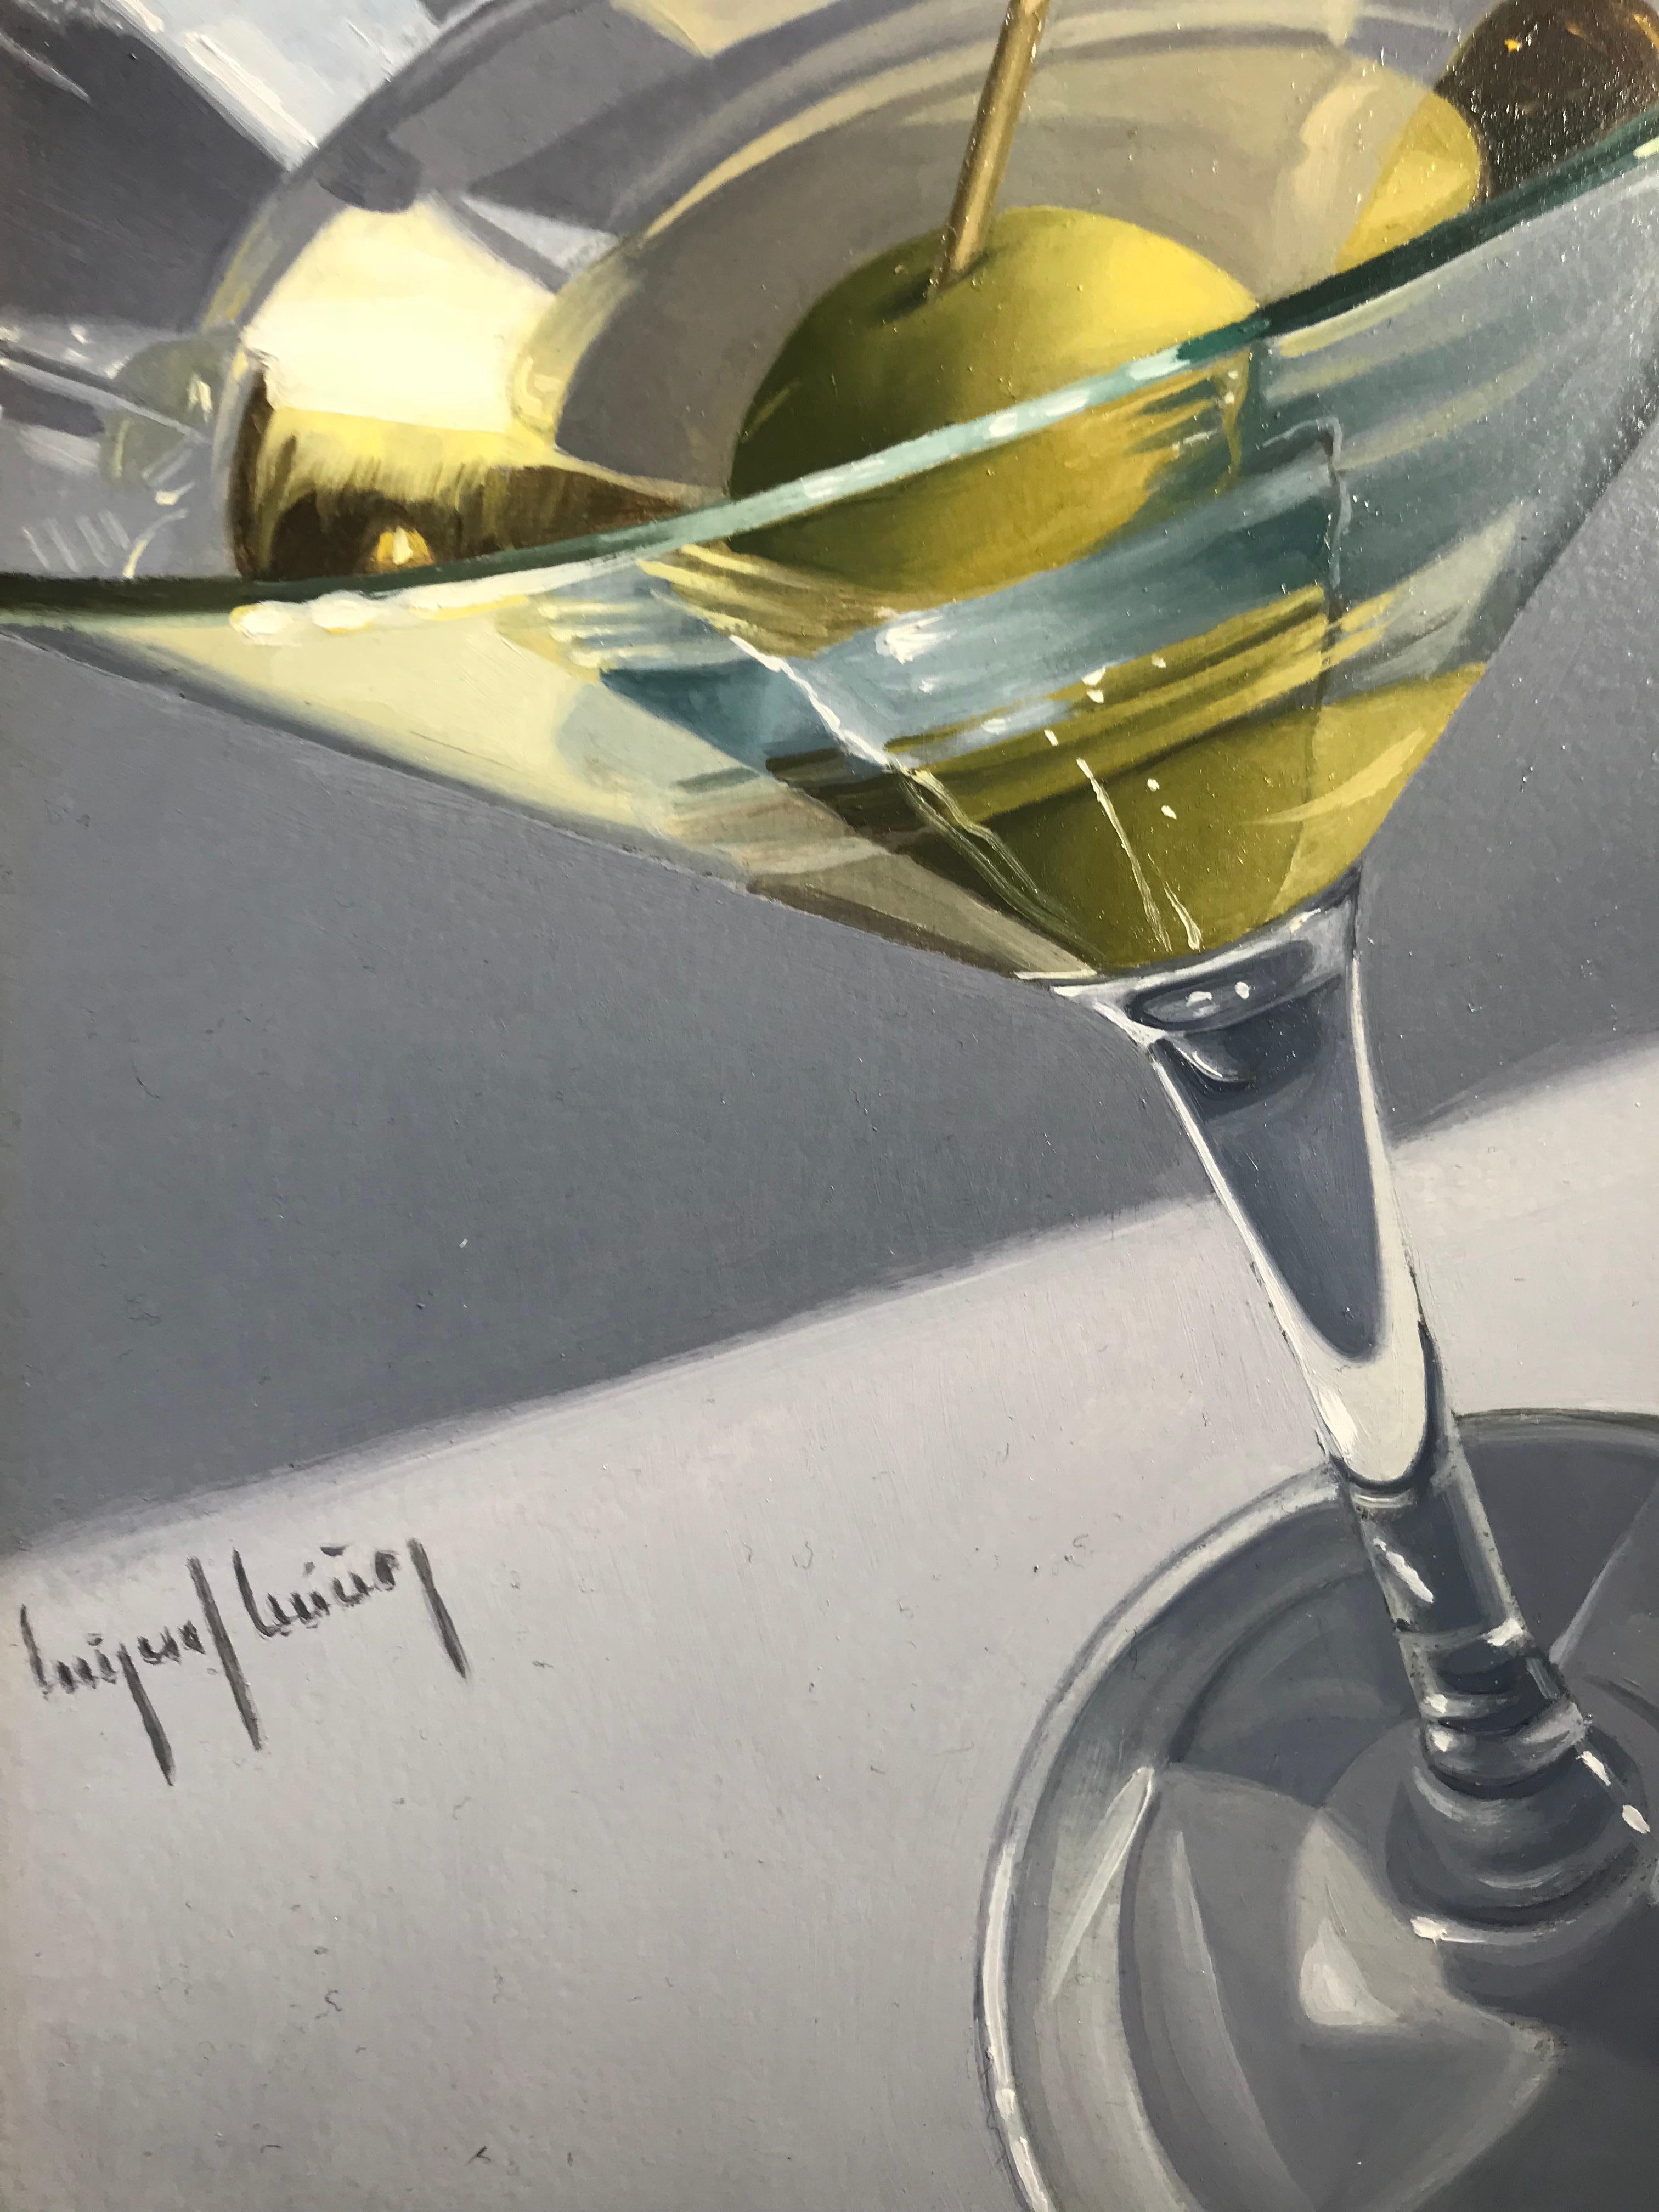 'Shaken not Stirred' by Miguel Angel Nunez is an incredible example of the artist being able to capture the stunning details and light with the up most precision 

Through Miguel’s precise brushstrokes and fine layers of paint a sense of precision